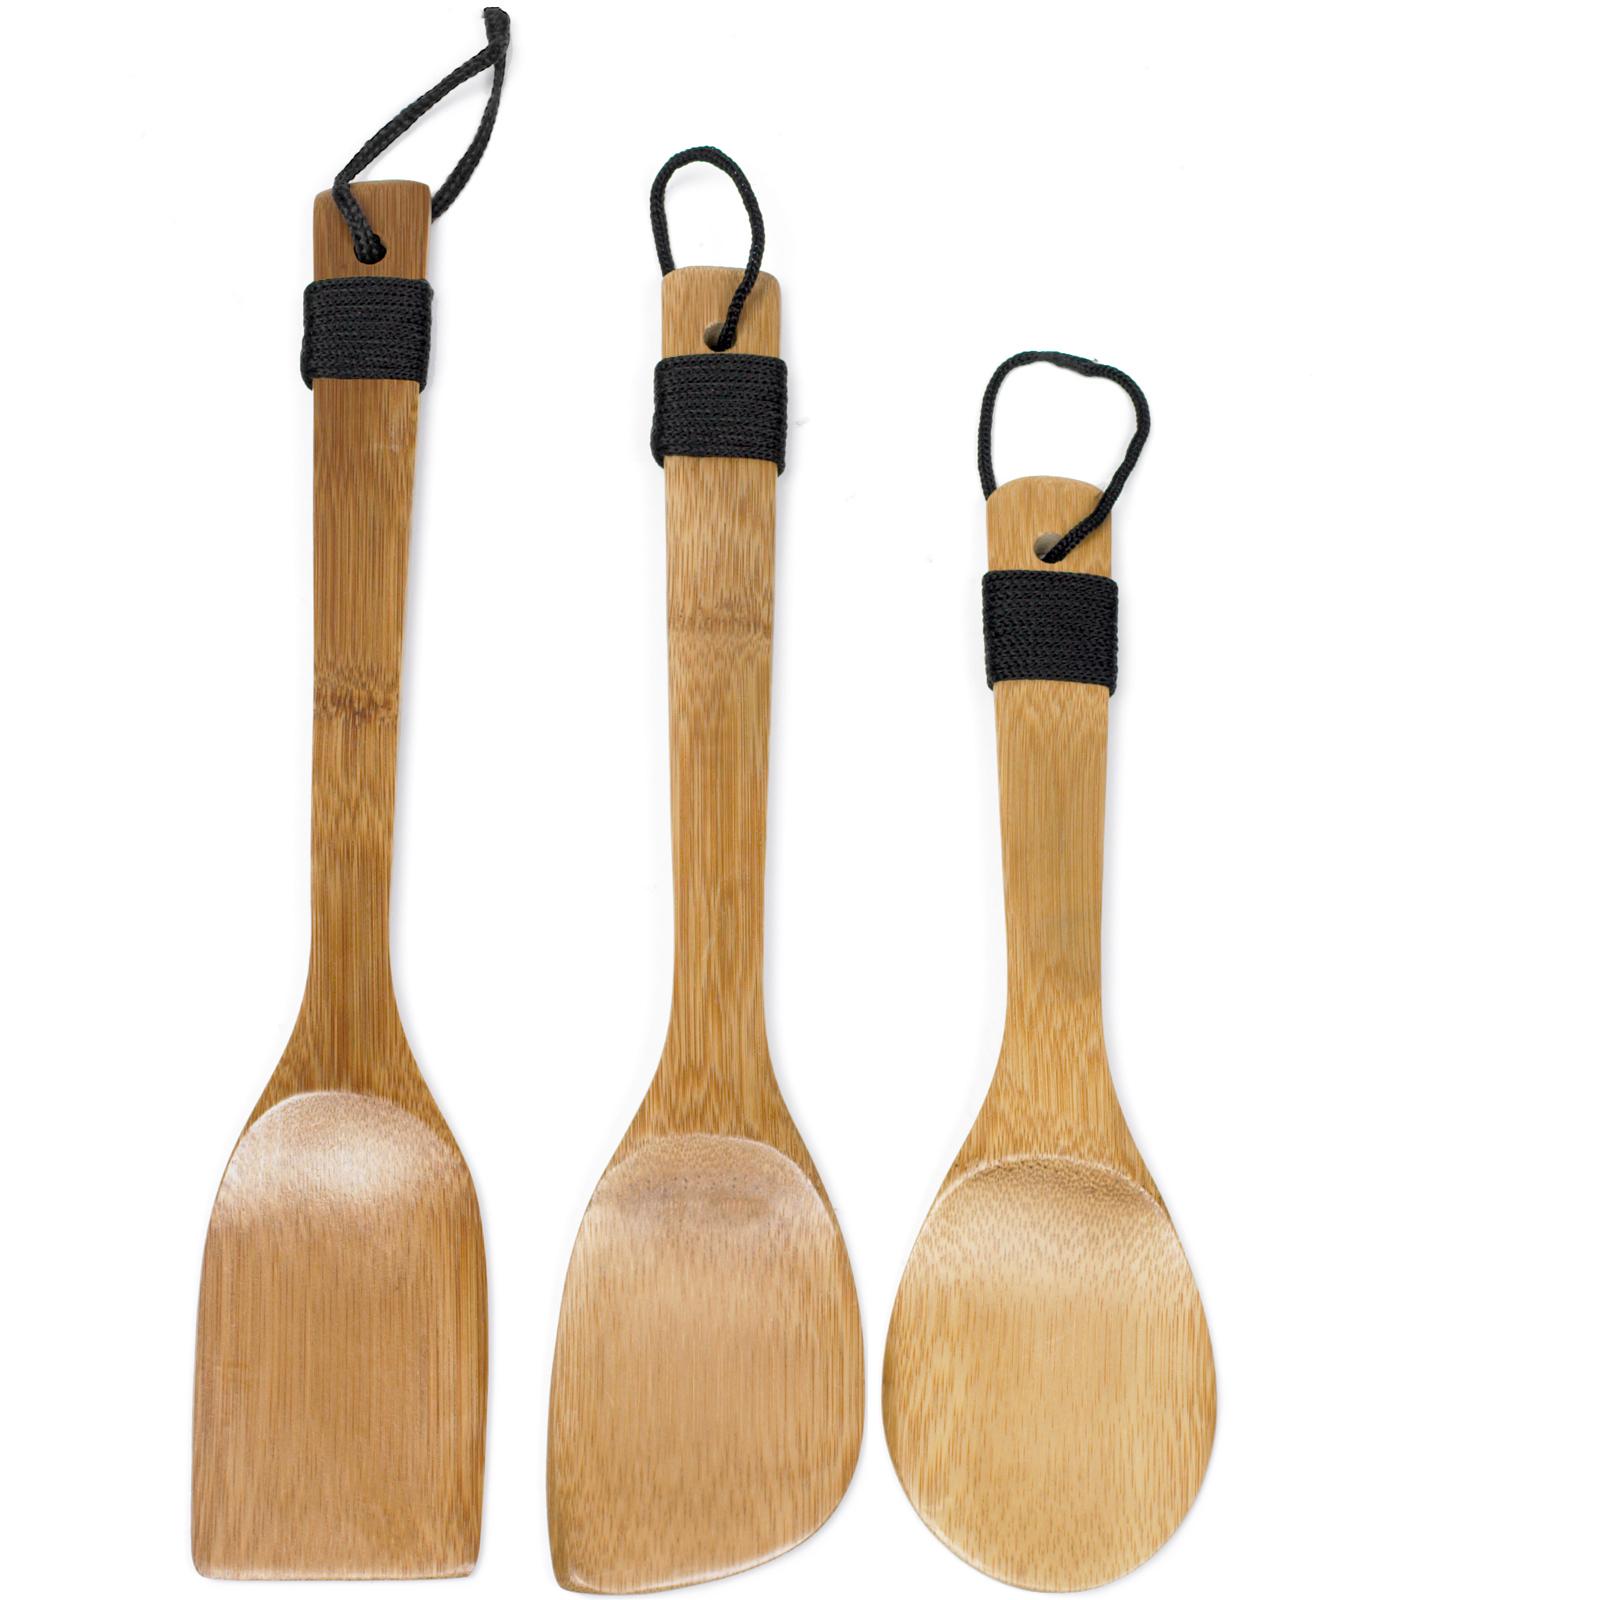 Imusa 3-Pack Bamboo Kitchen Tools